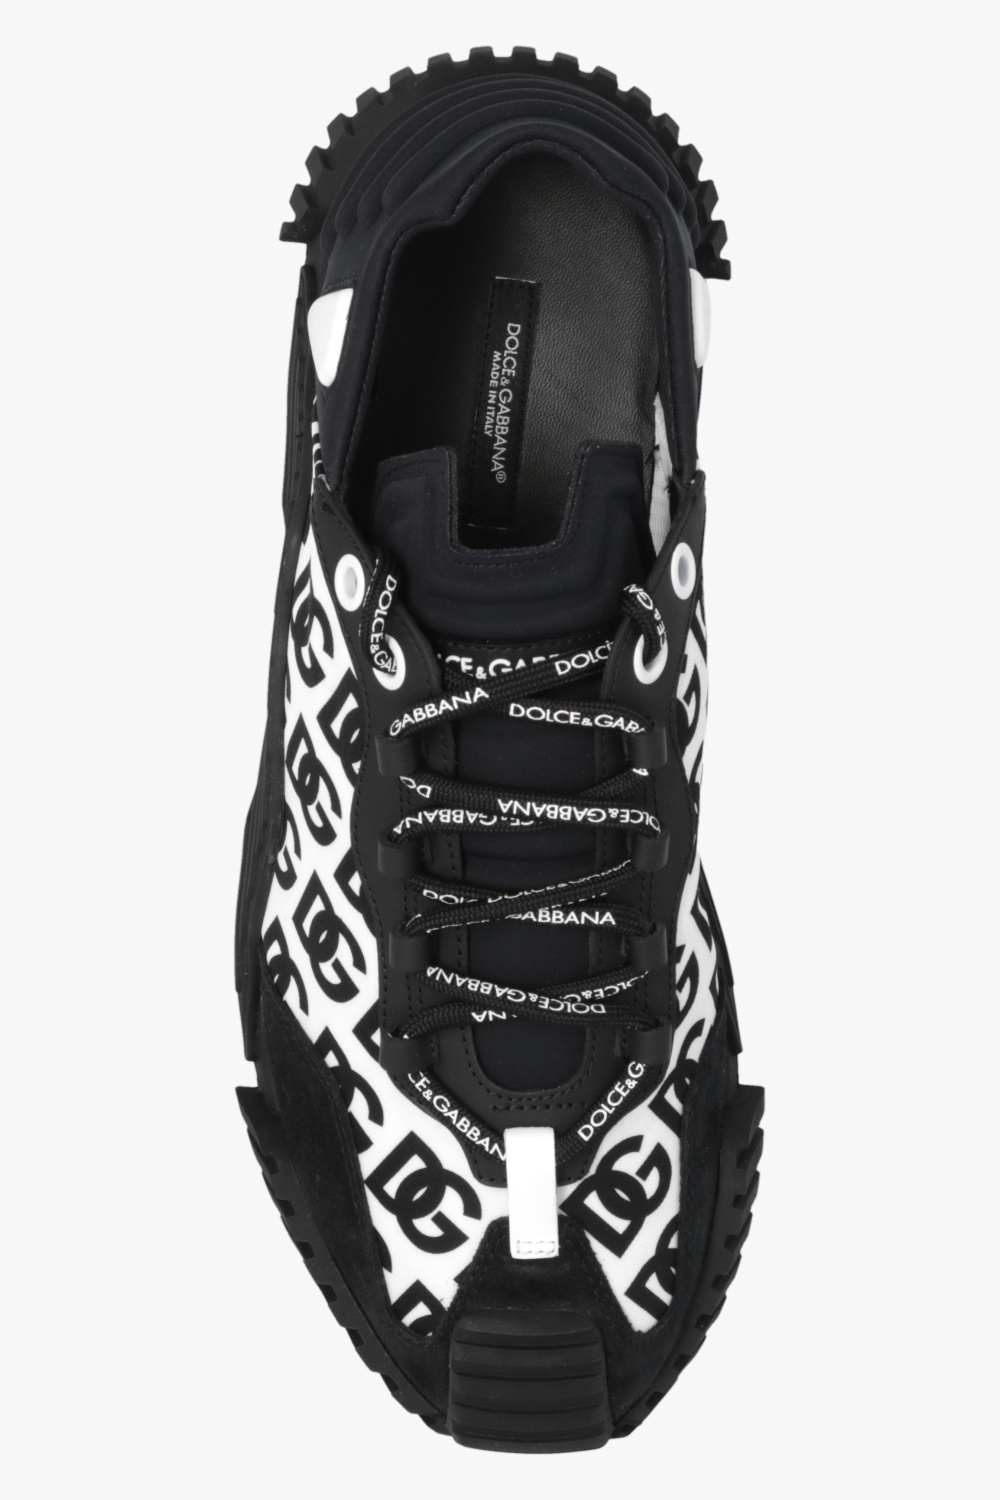 dolce cotton & Gabbana Monogrammed sneakers